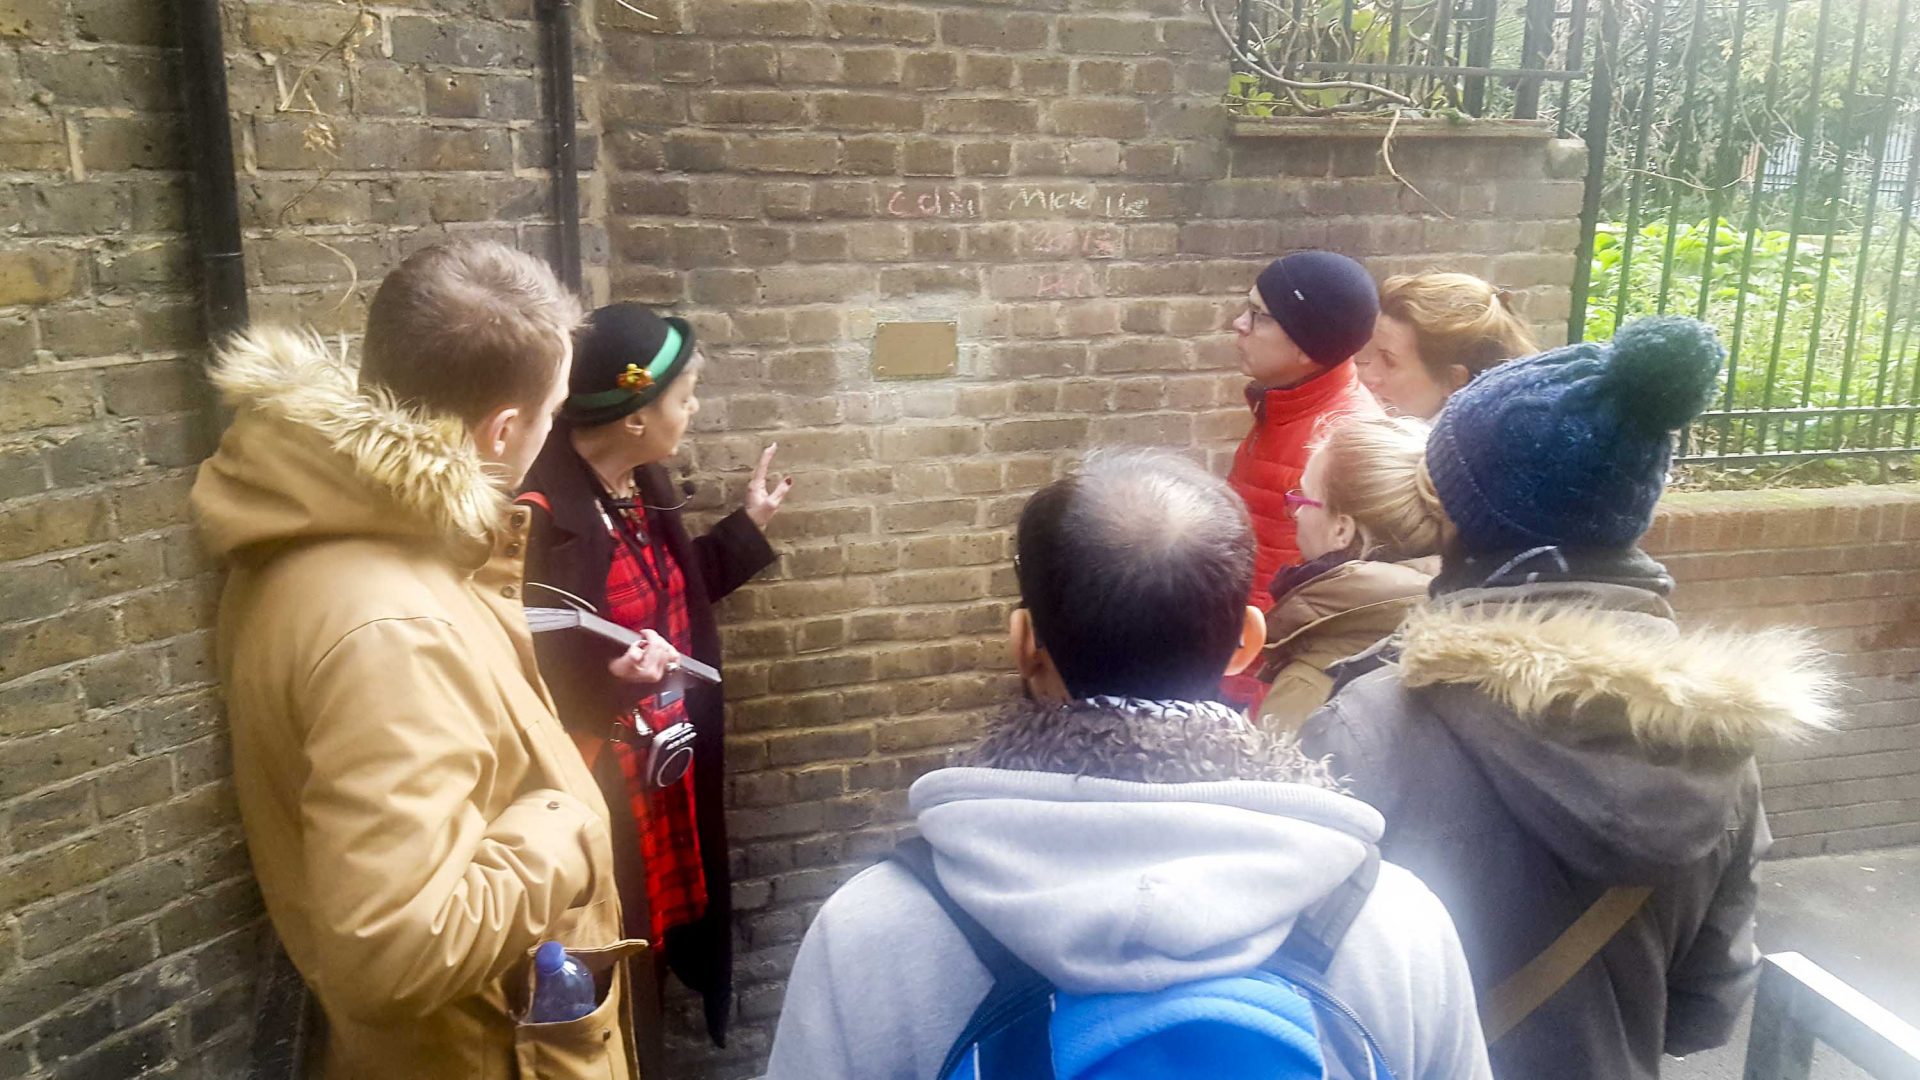 A woman points to something on a brick wall to the tour group